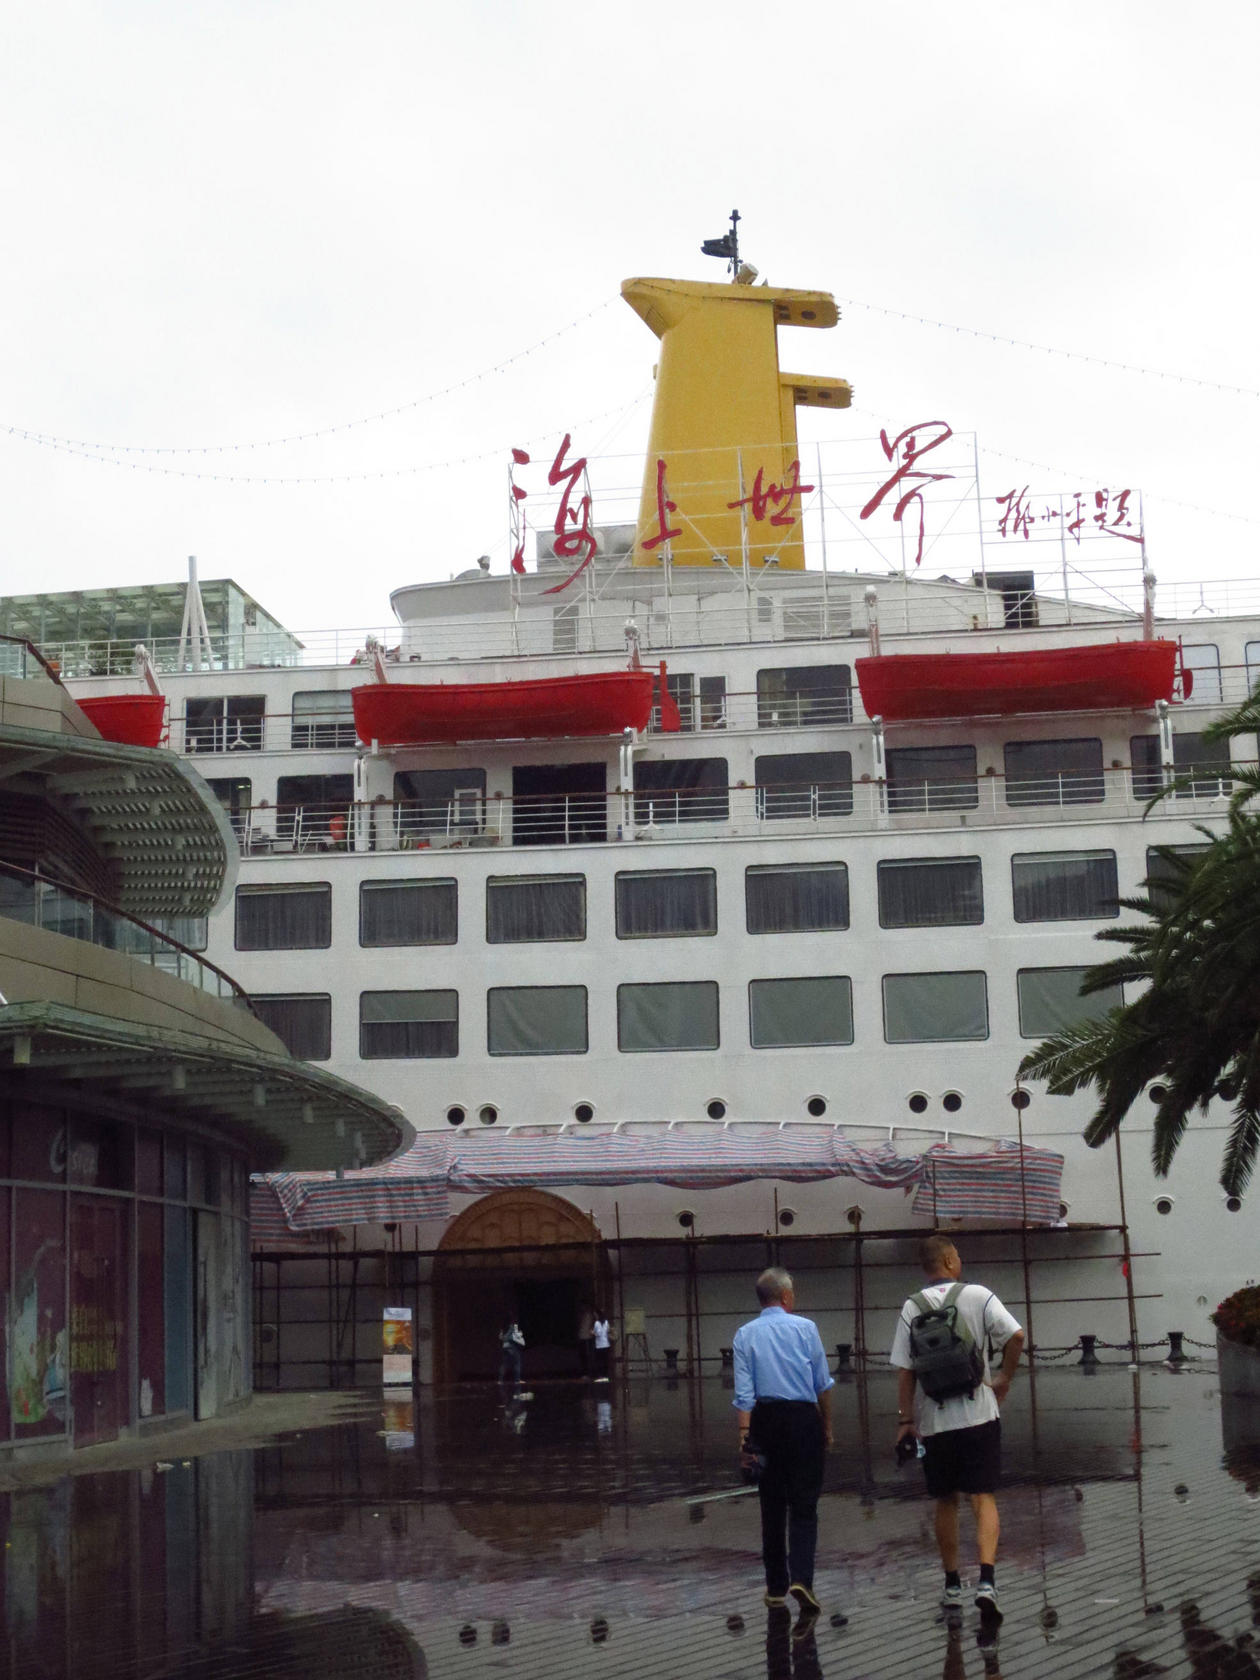 All ship-shaped: maritime design meets Liberace decor at the Cruise Inn in Nanshan. Photo: Cecilie Gamst Berg